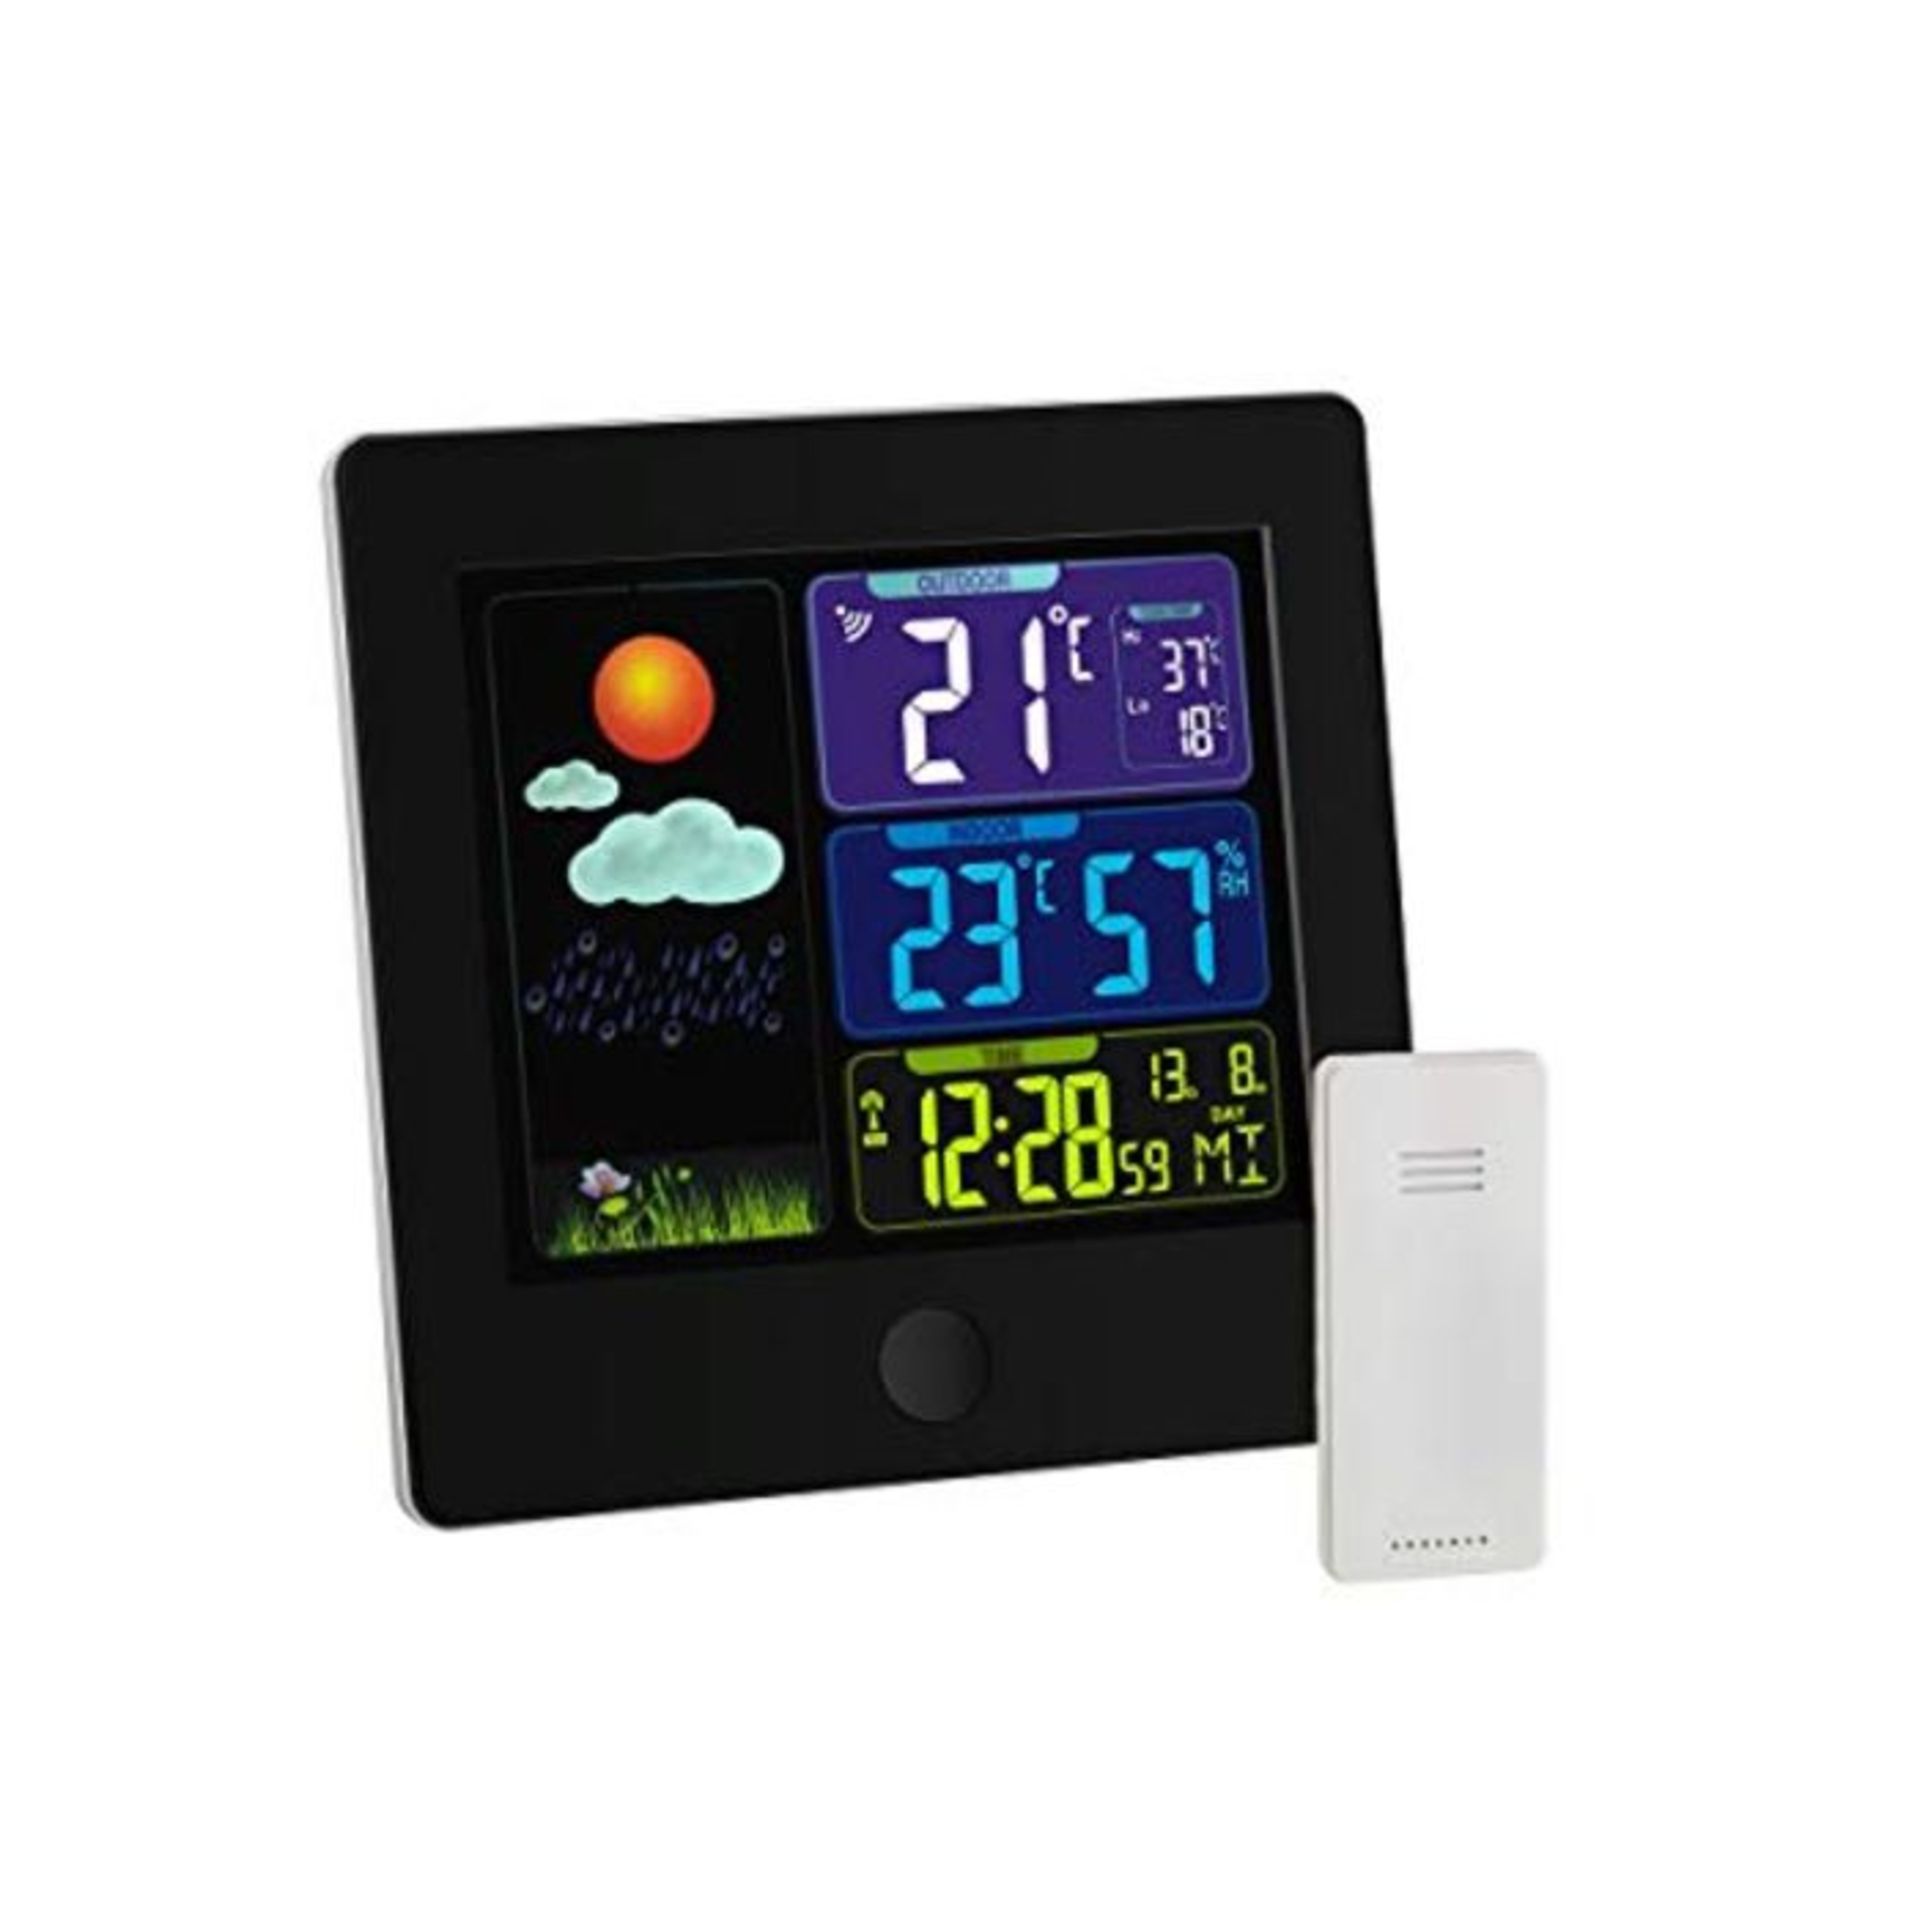 Blooming Weather 35.1133.01 Sun Colour Wireless Weather Station with Case - Black